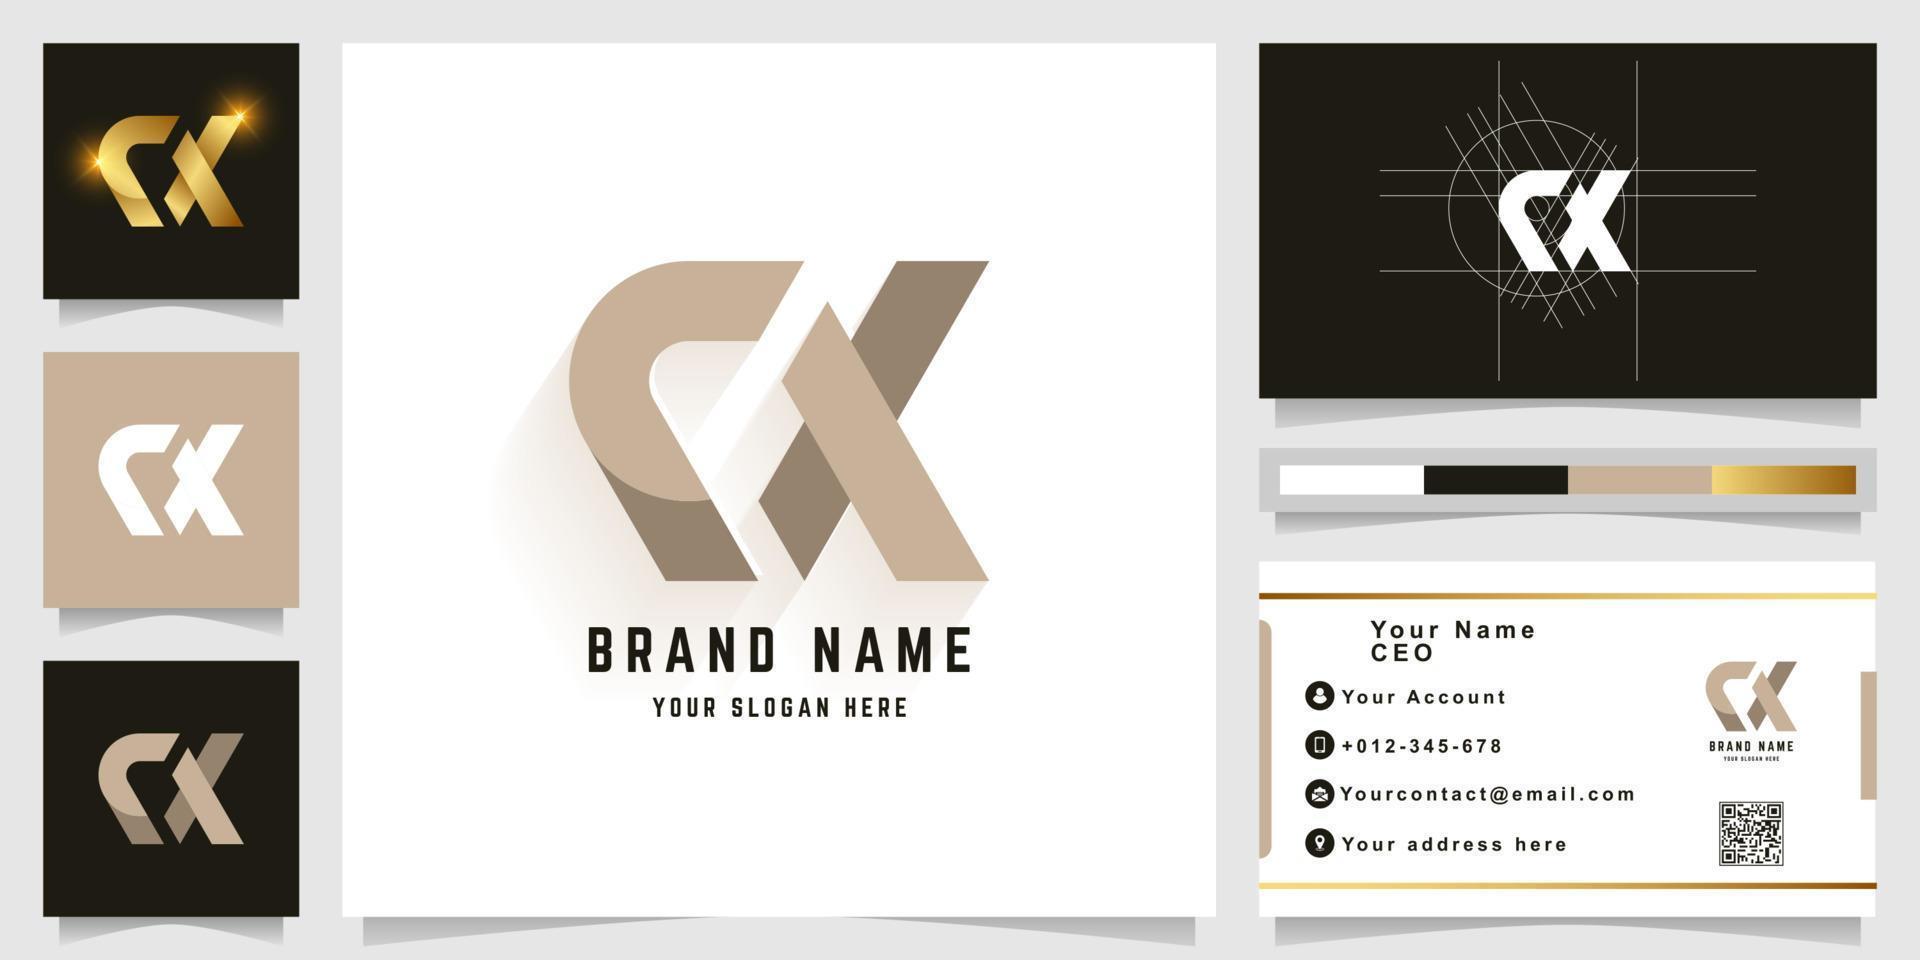 Letter CX or AX monogram logo with business card design vector